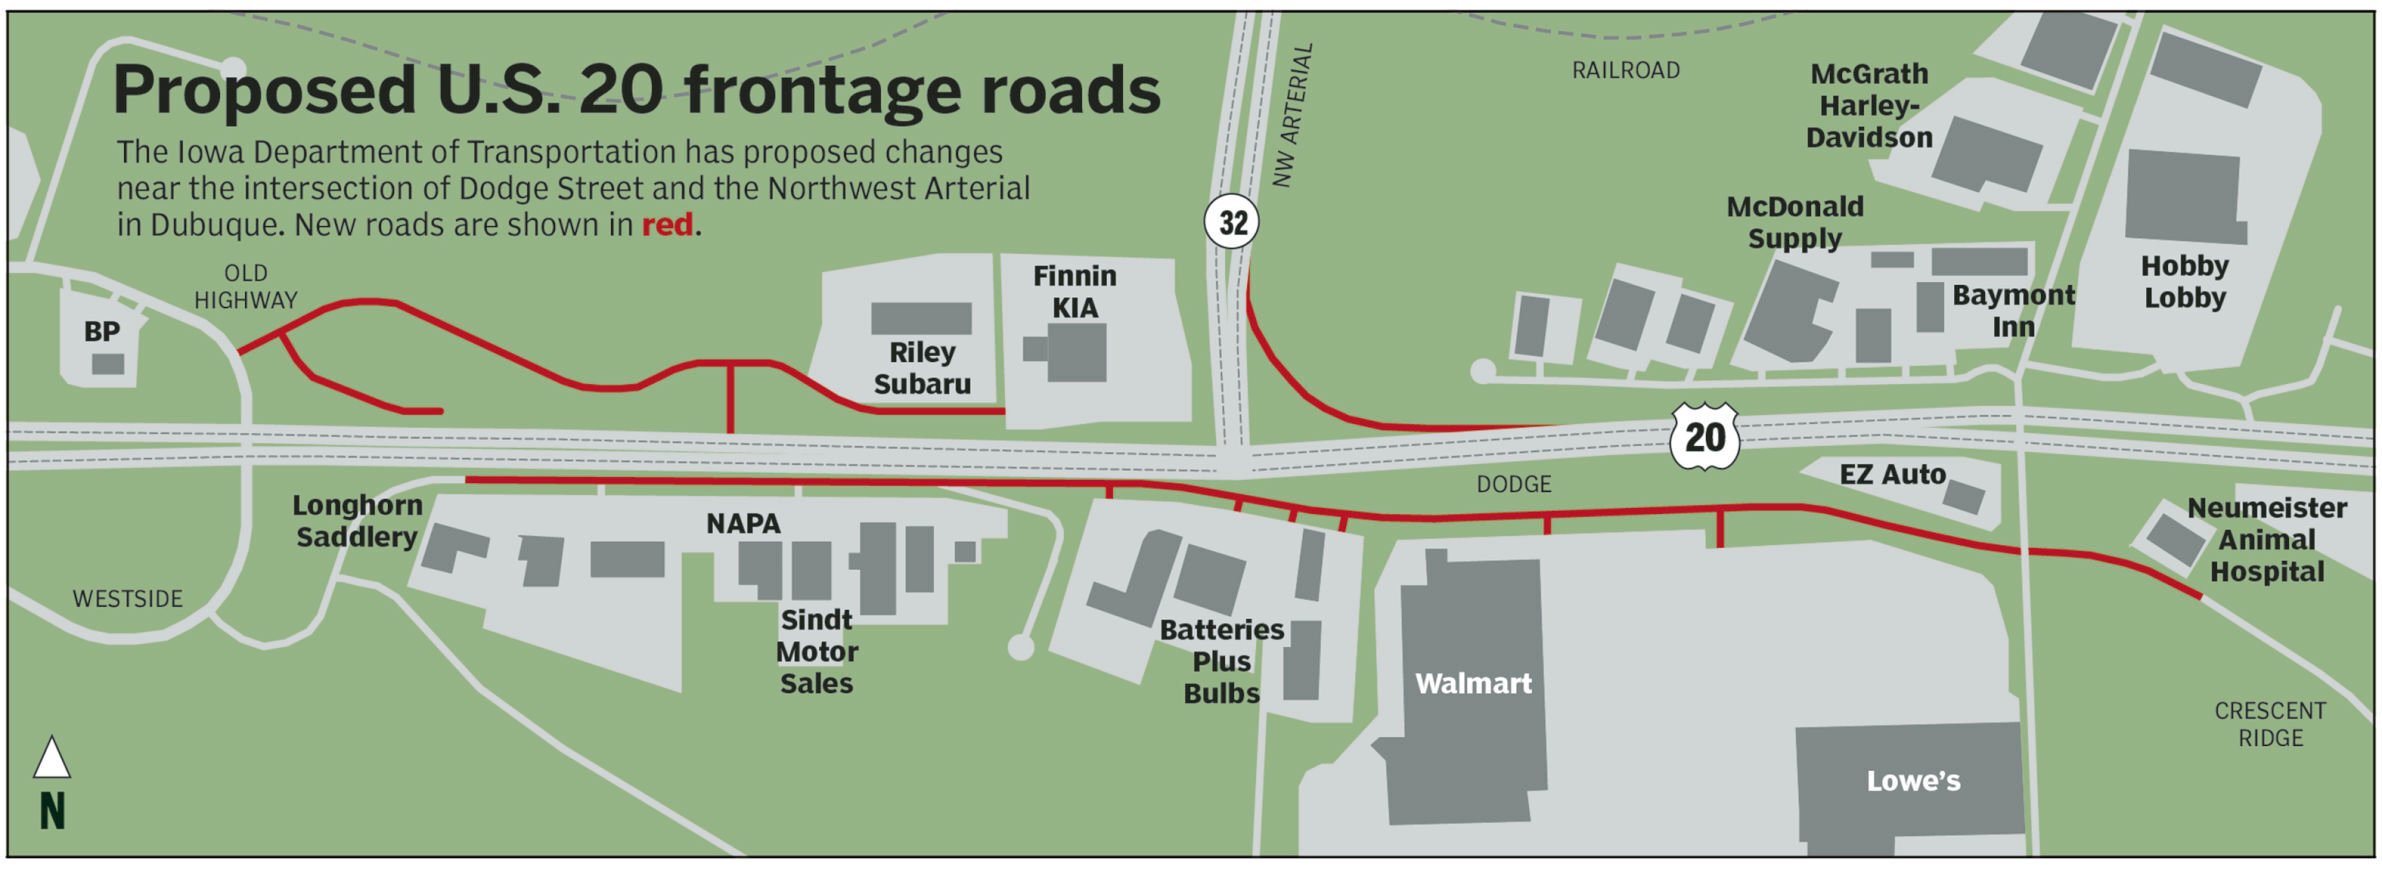 The Iowa Department of Transportation has proposed changes near the intersection of Dodge Street and the Northwest Arterial in Dubuque. New roads are shown in red.    PHOTO CREDIT: Telegraph Herald